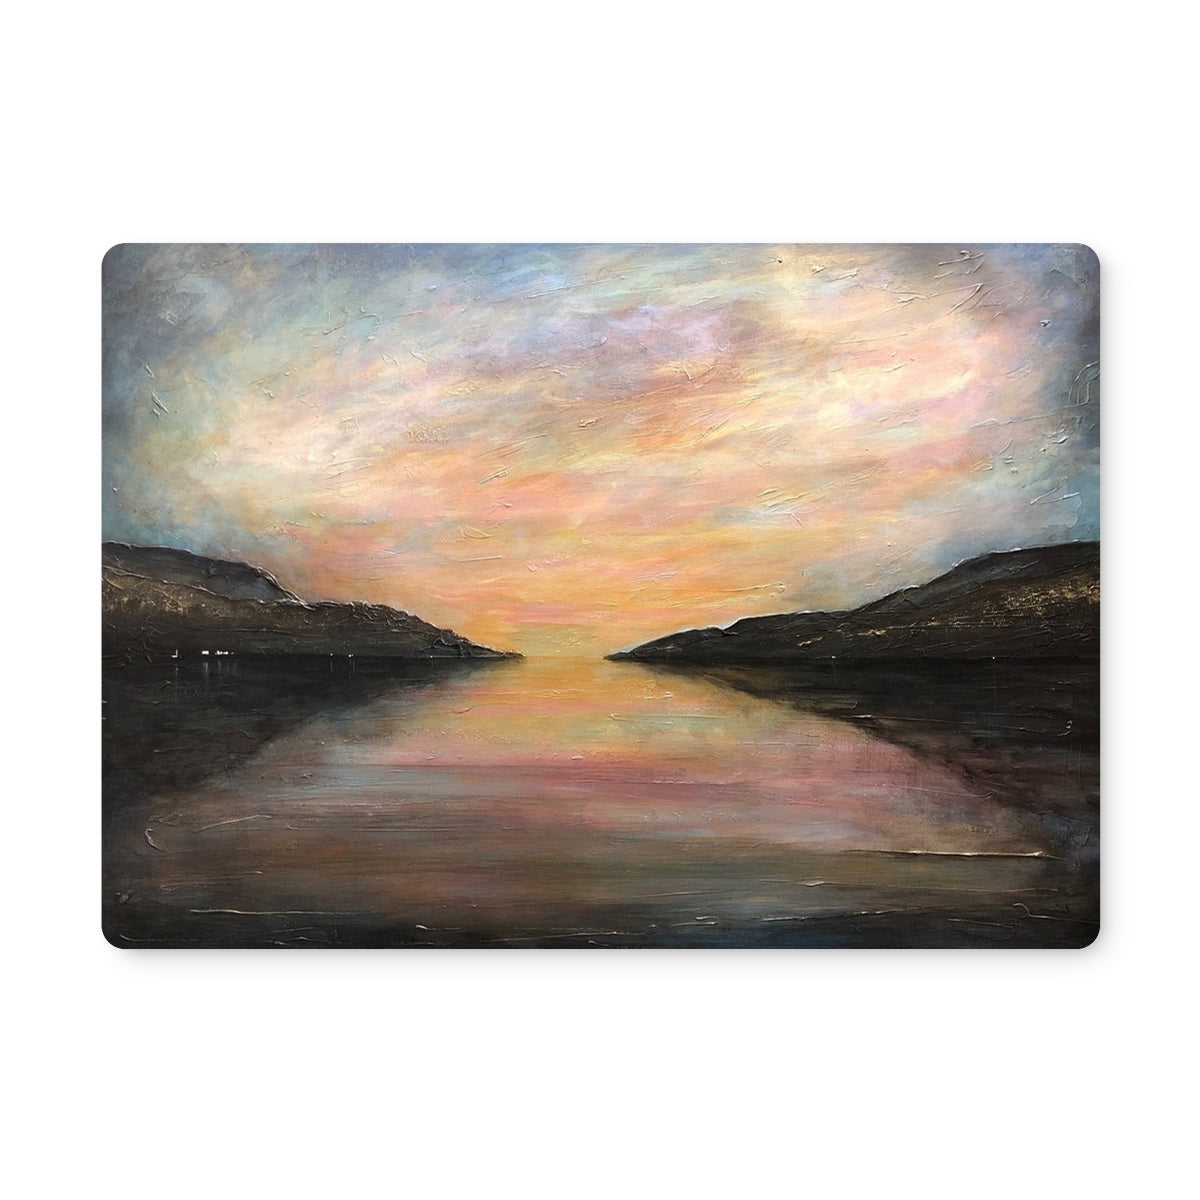 Loch Ness Glow Art Gifts Placemat-Placemats-Scottish Lochs & Mountains Art Gallery-Single Placemat-Paintings, Prints, Homeware, Art Gifts From Scotland By Scottish Artist Kevin Hunter